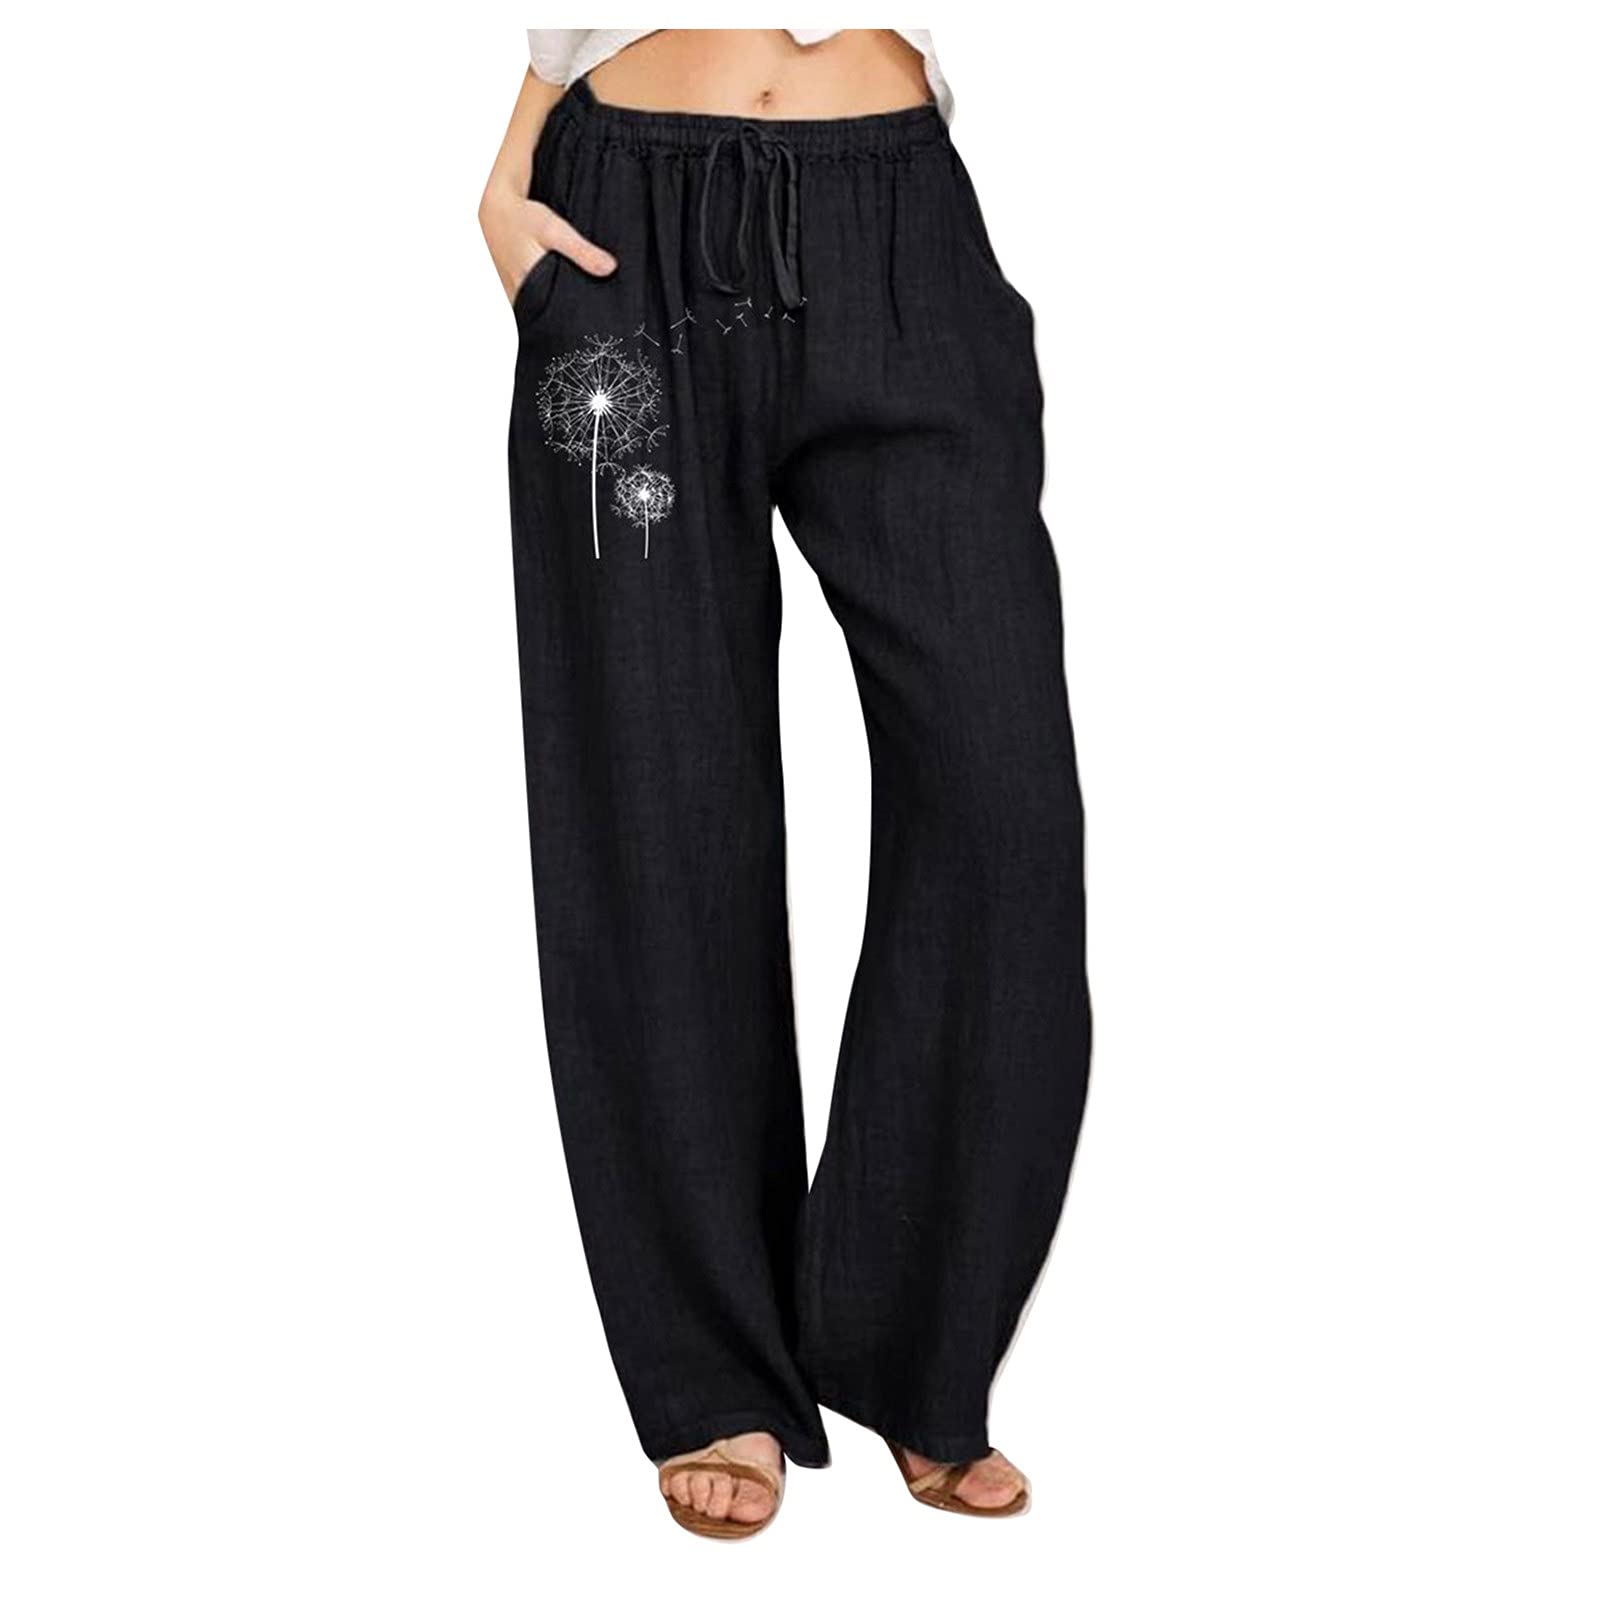 Plus Size Pants Women's Solid Color Casual Trousers Loose Slimming